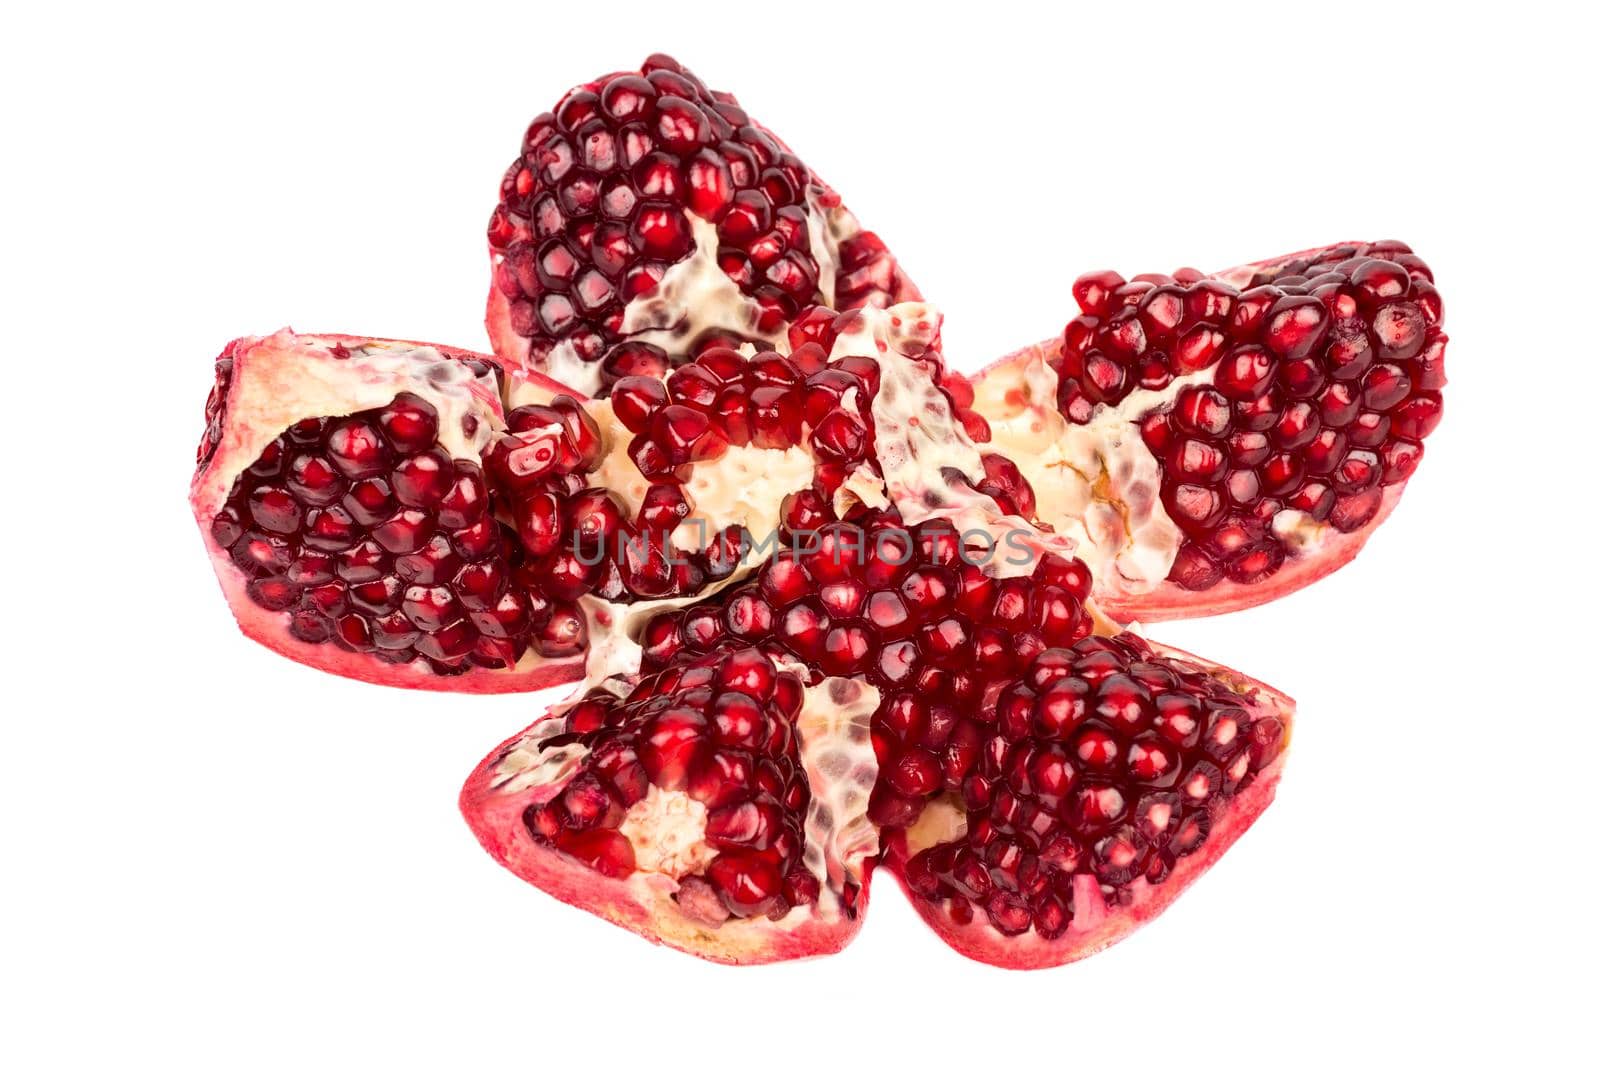 Fresh pomegranate cut into five pieces on a white background